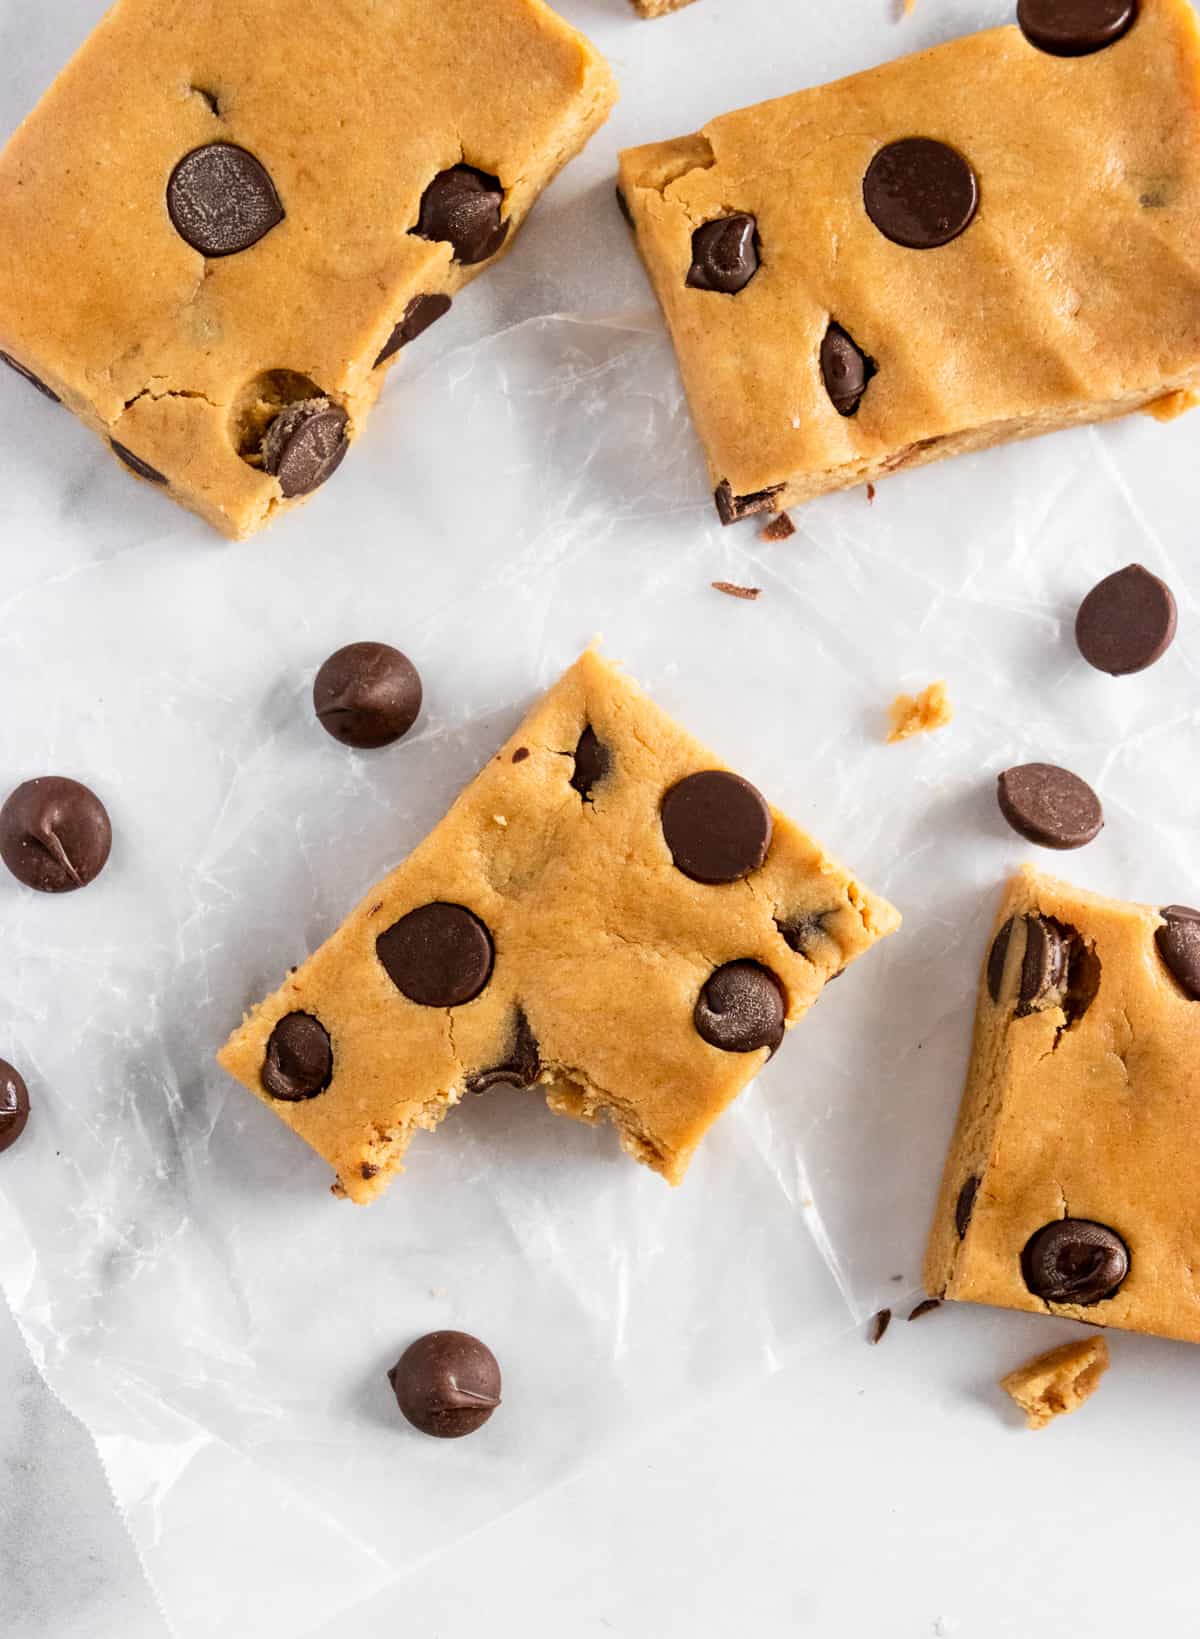 Bite shot of peanut butter chocolate chip bars with chocolate chips.